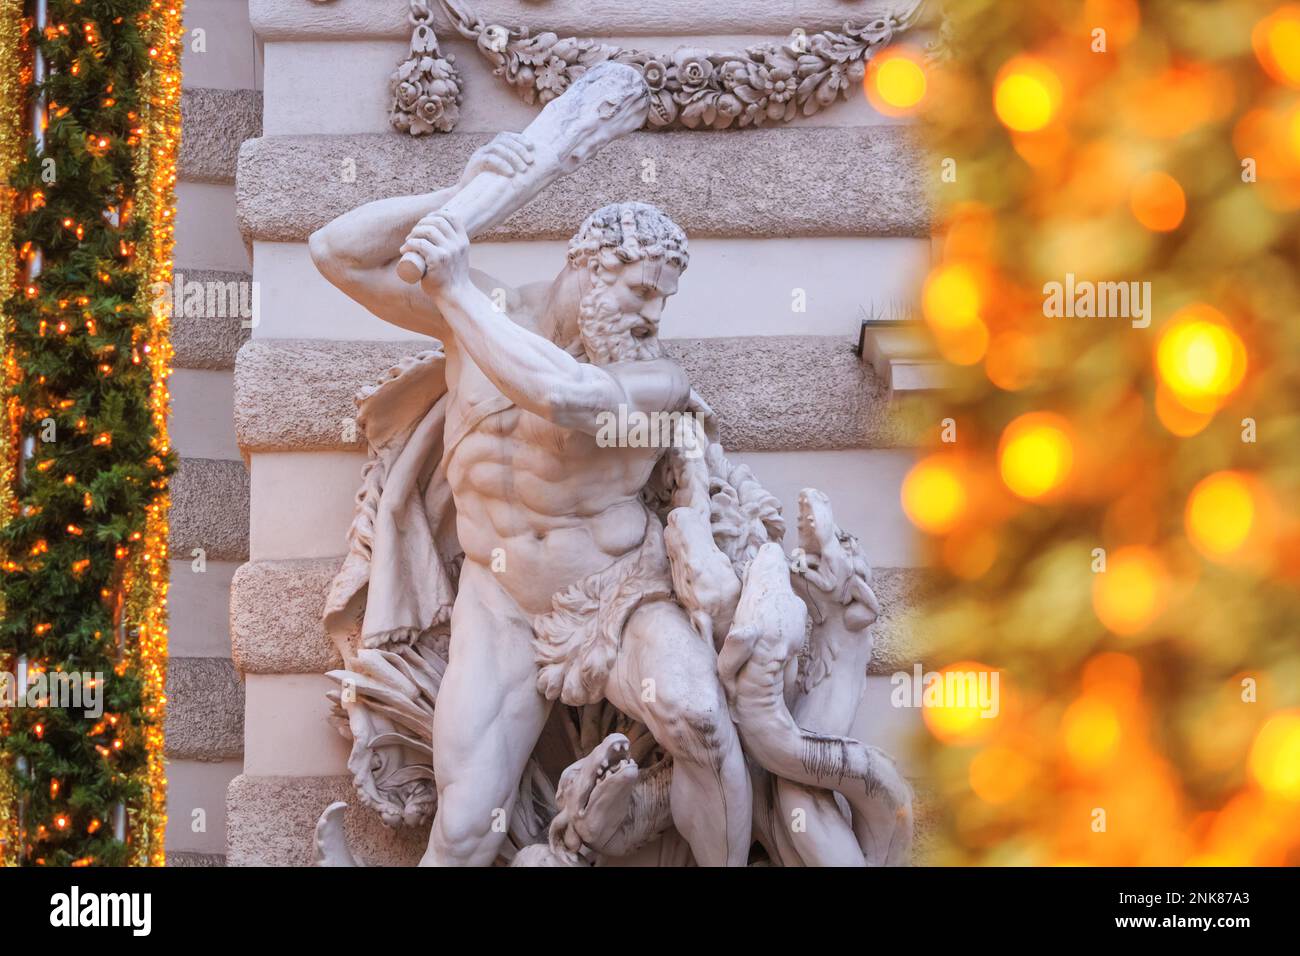 Festive cityscape - view of the sculpture of Hercules with the Lernaean Hydra on the St. Michael's Wing, Vienna, Austria Stock Photo